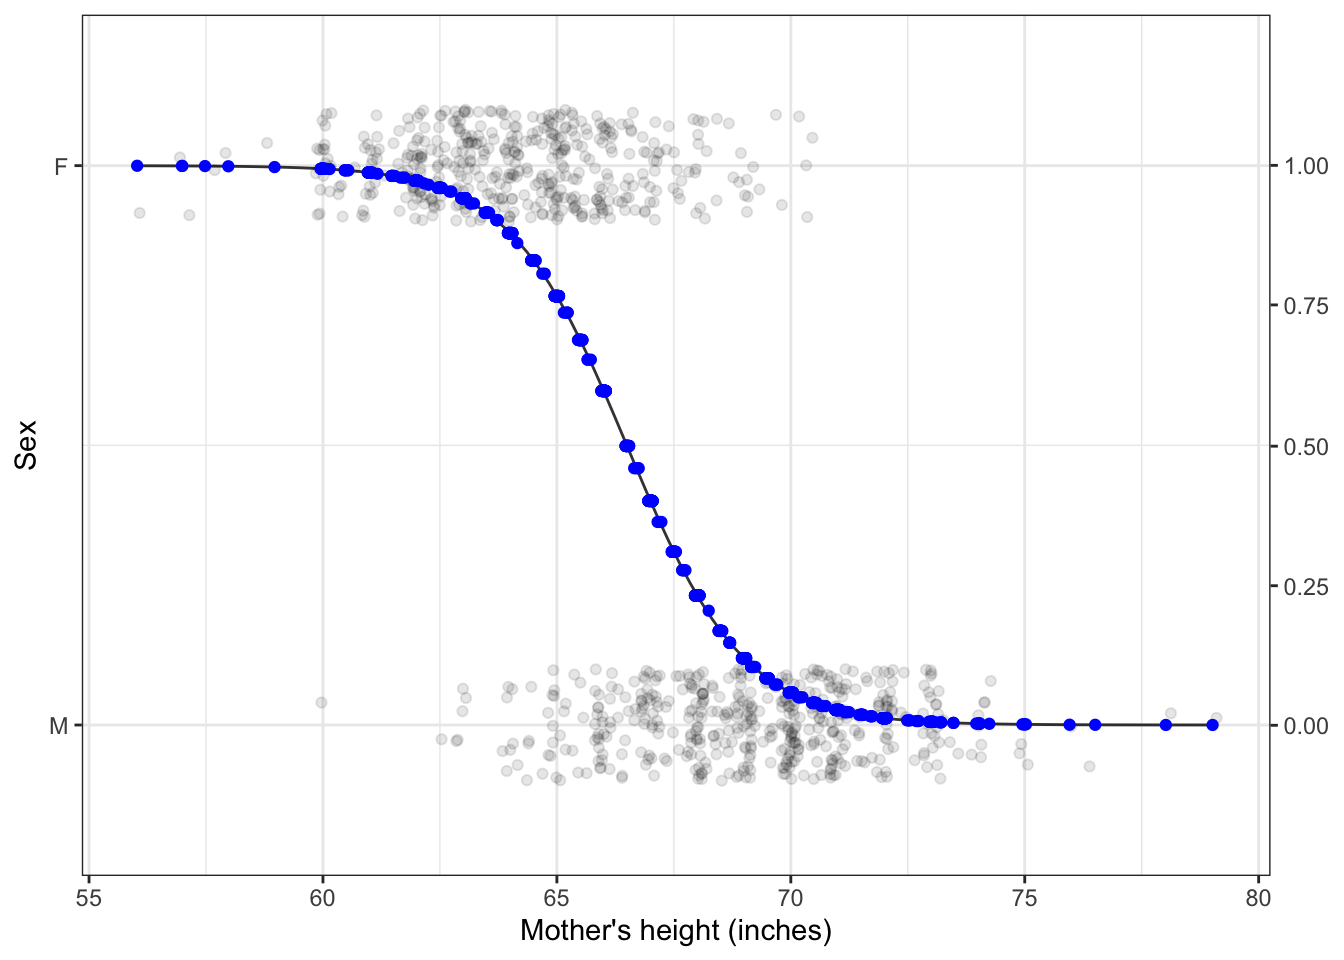 Figure 5.7: Model values for a model of sex, with mother’s height as the explanatory variable. Response variance: 0.25; Model value variance: 0.14